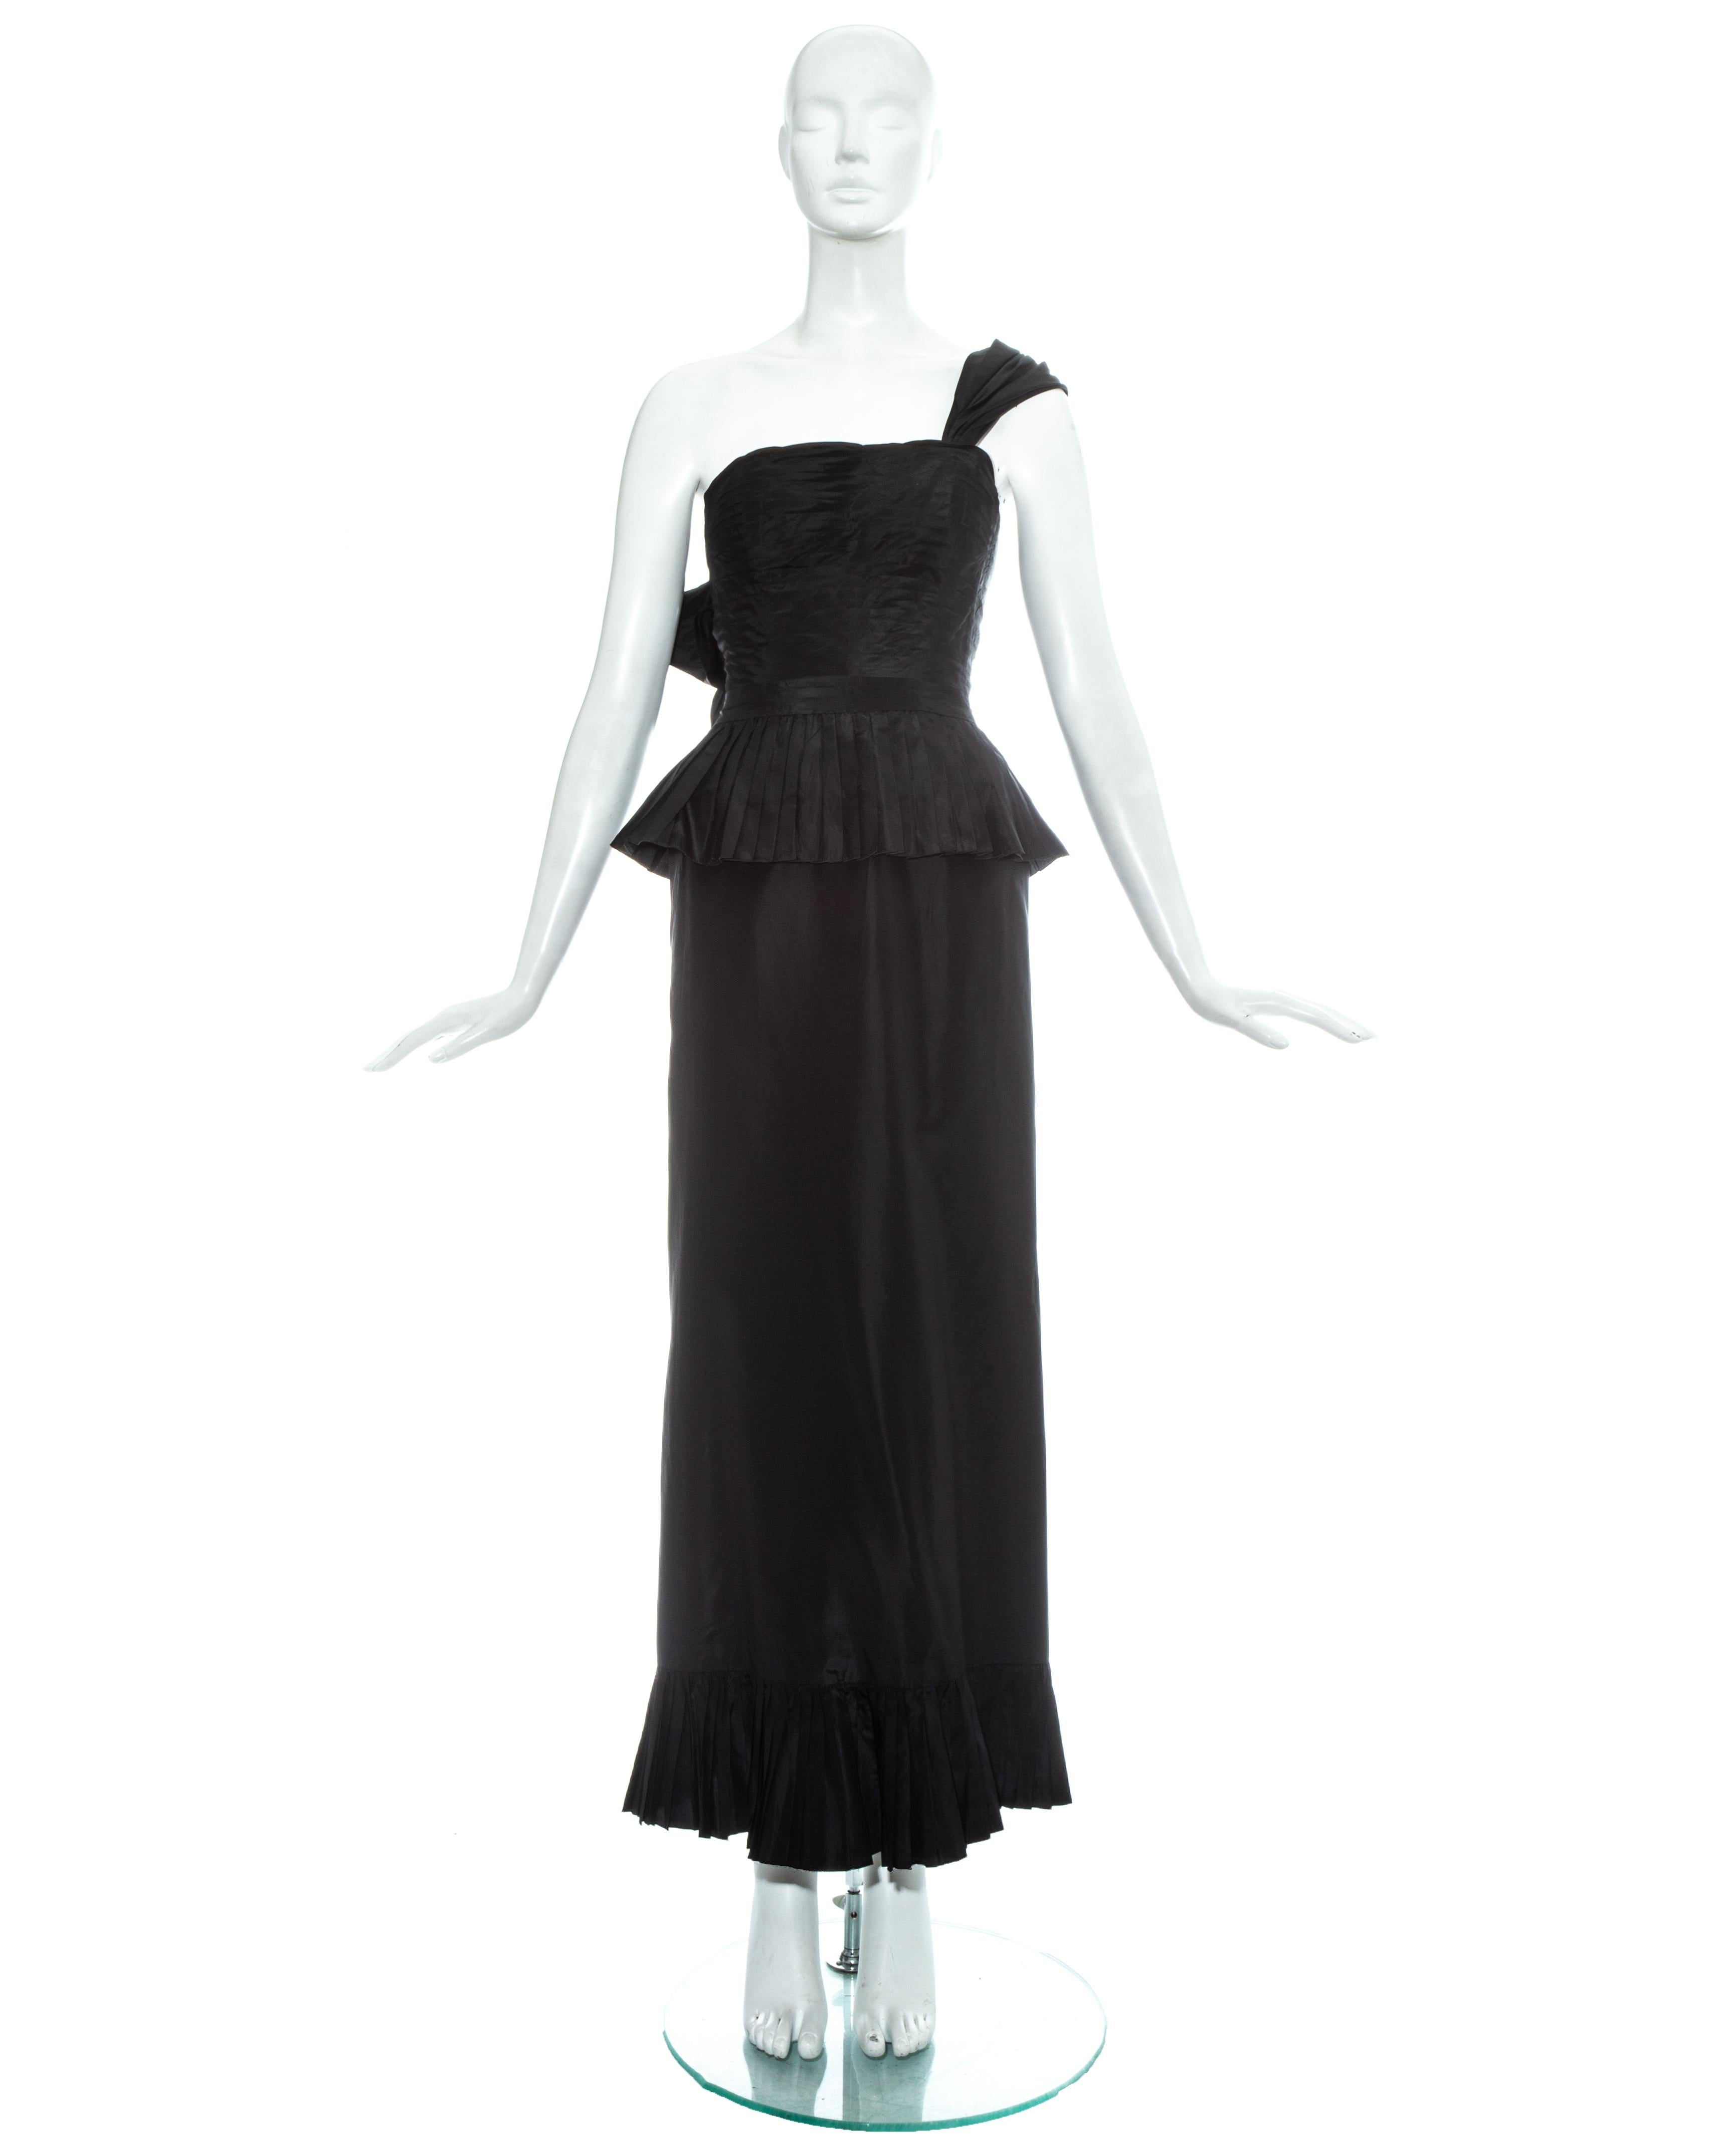 Chanel by Karl Lagerfeld; black silk taffeta evening dress. Bustier with horizontal pleats, internal boing, box pleated peplum and draped shoulder strap with decorative bow fastening. Maxi skirt with box pleated trim, back vent with decorative bow